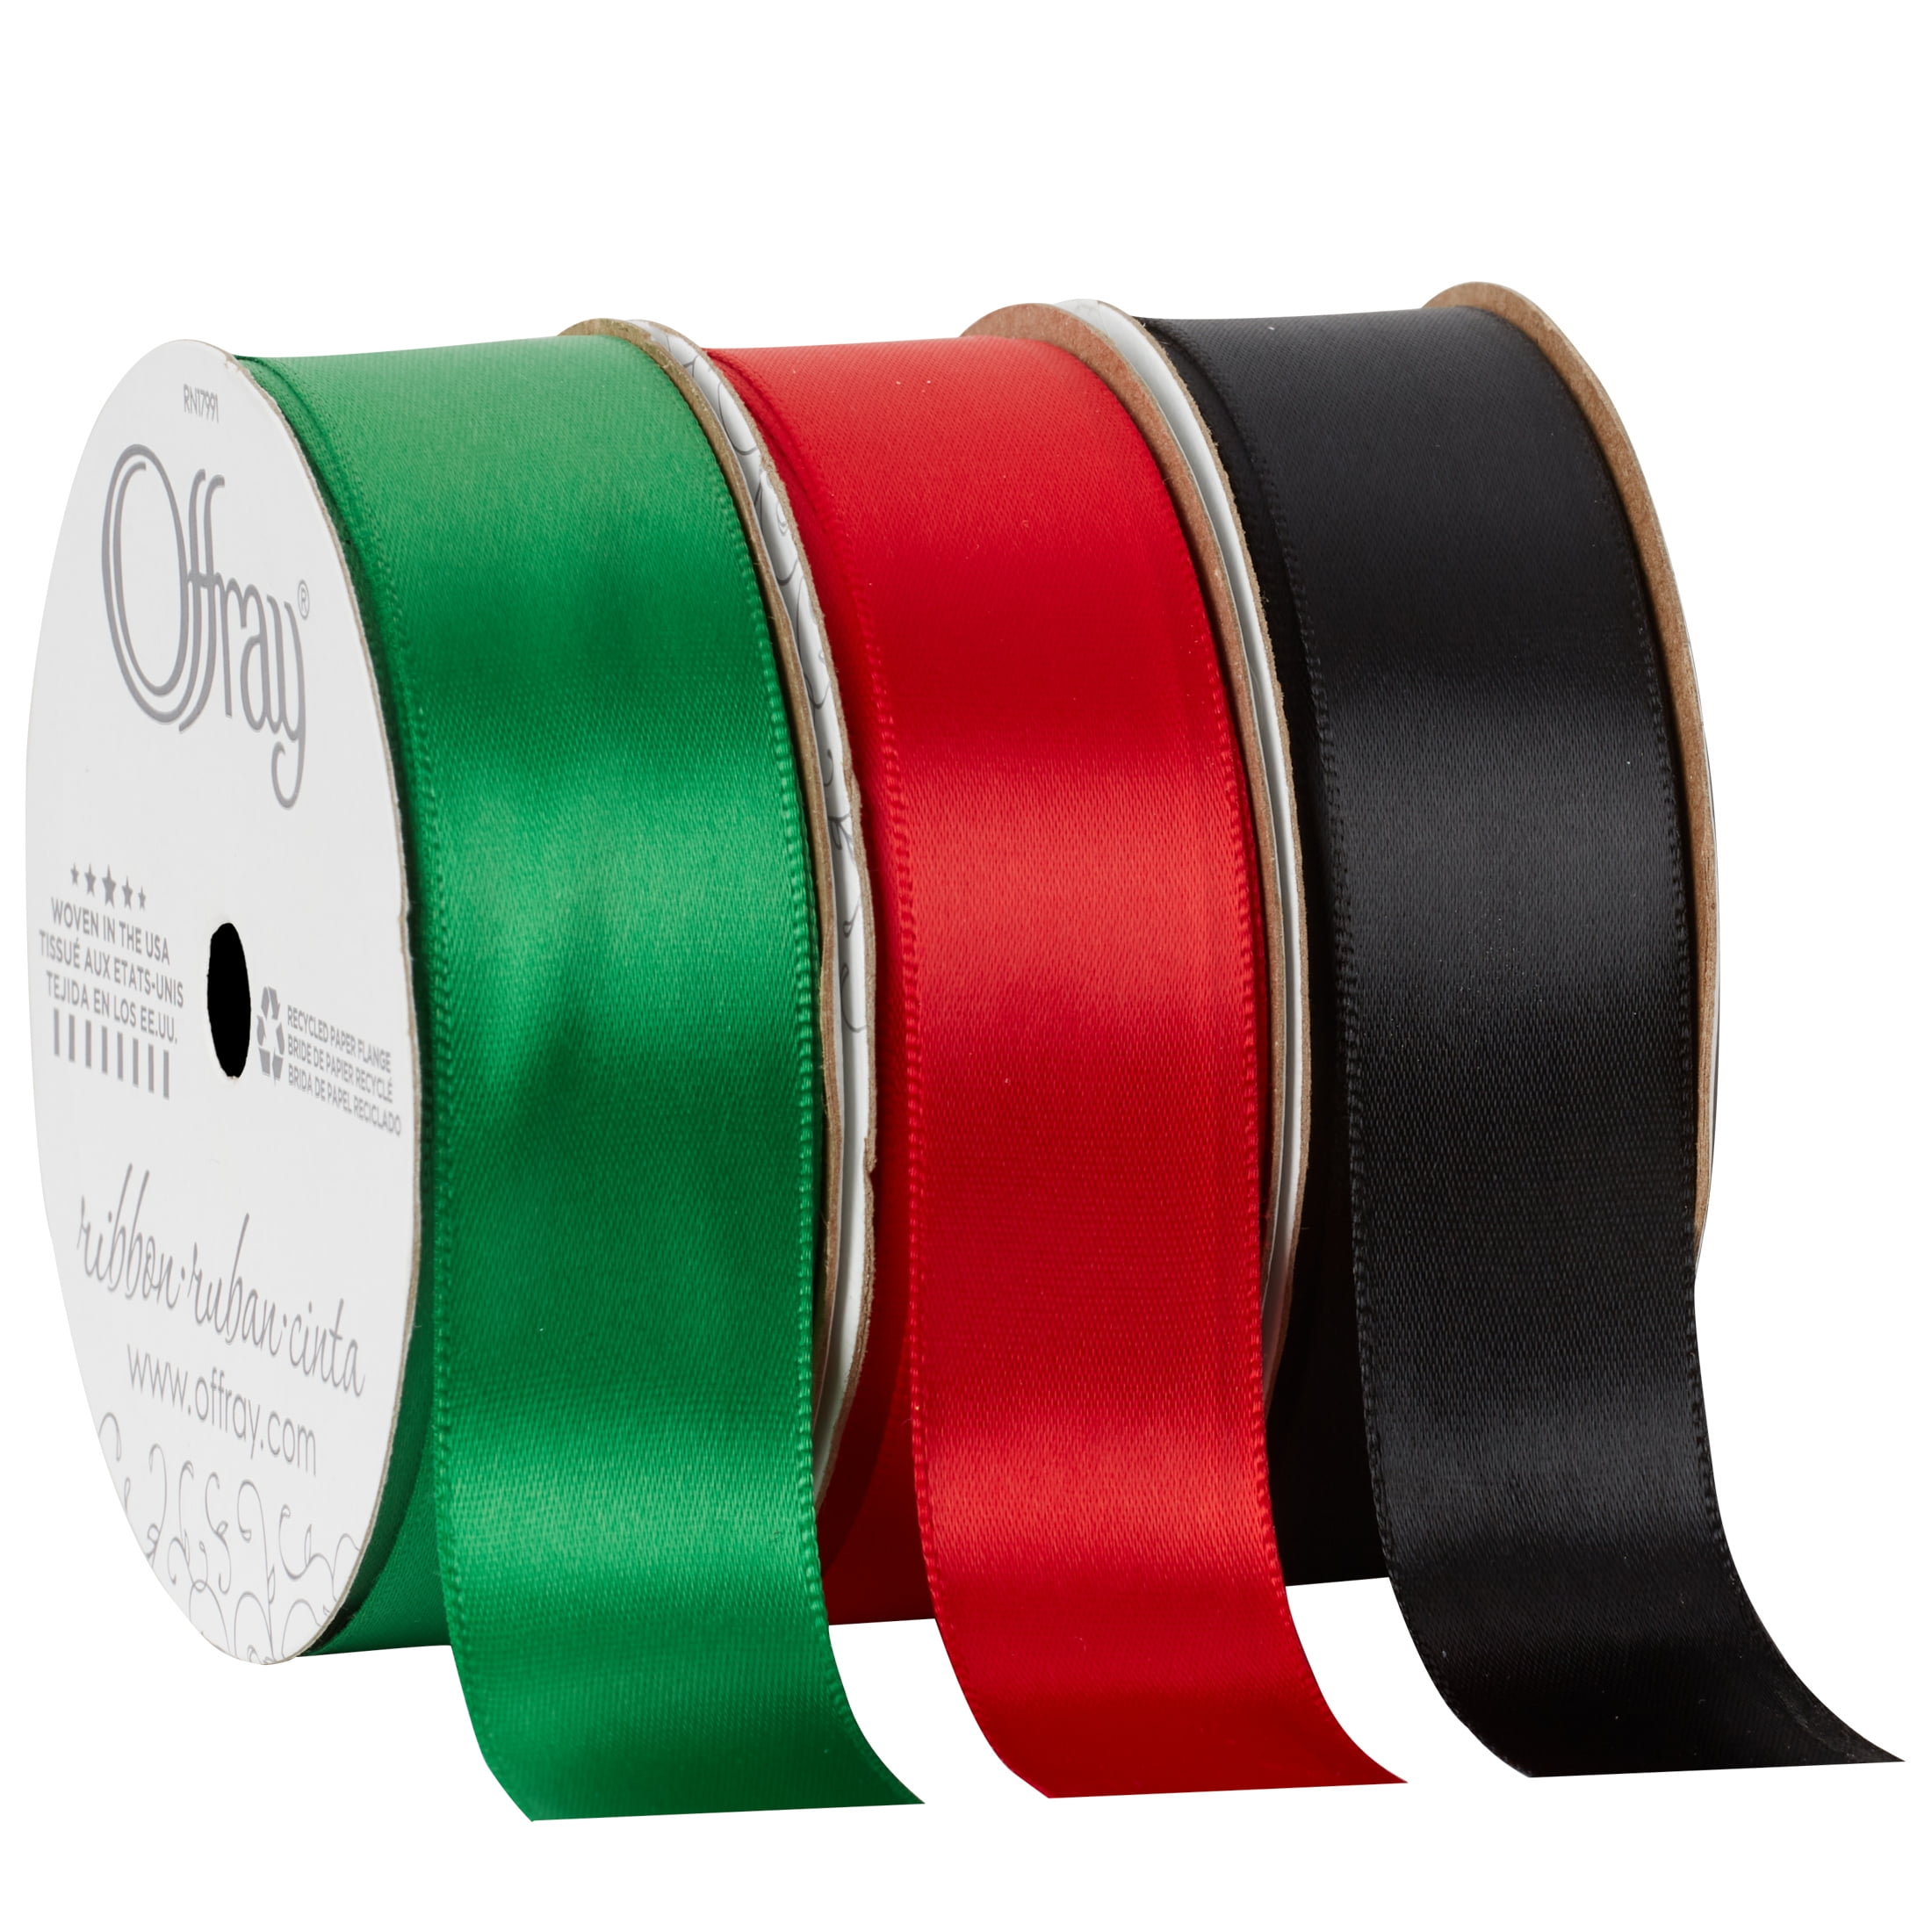 1-1/2 Inch Double Face Satin Ribbon, Polyester Compatibleest Green Ribbon  50 Yards Per Roll Compatible Gift Wrapping Bows Making